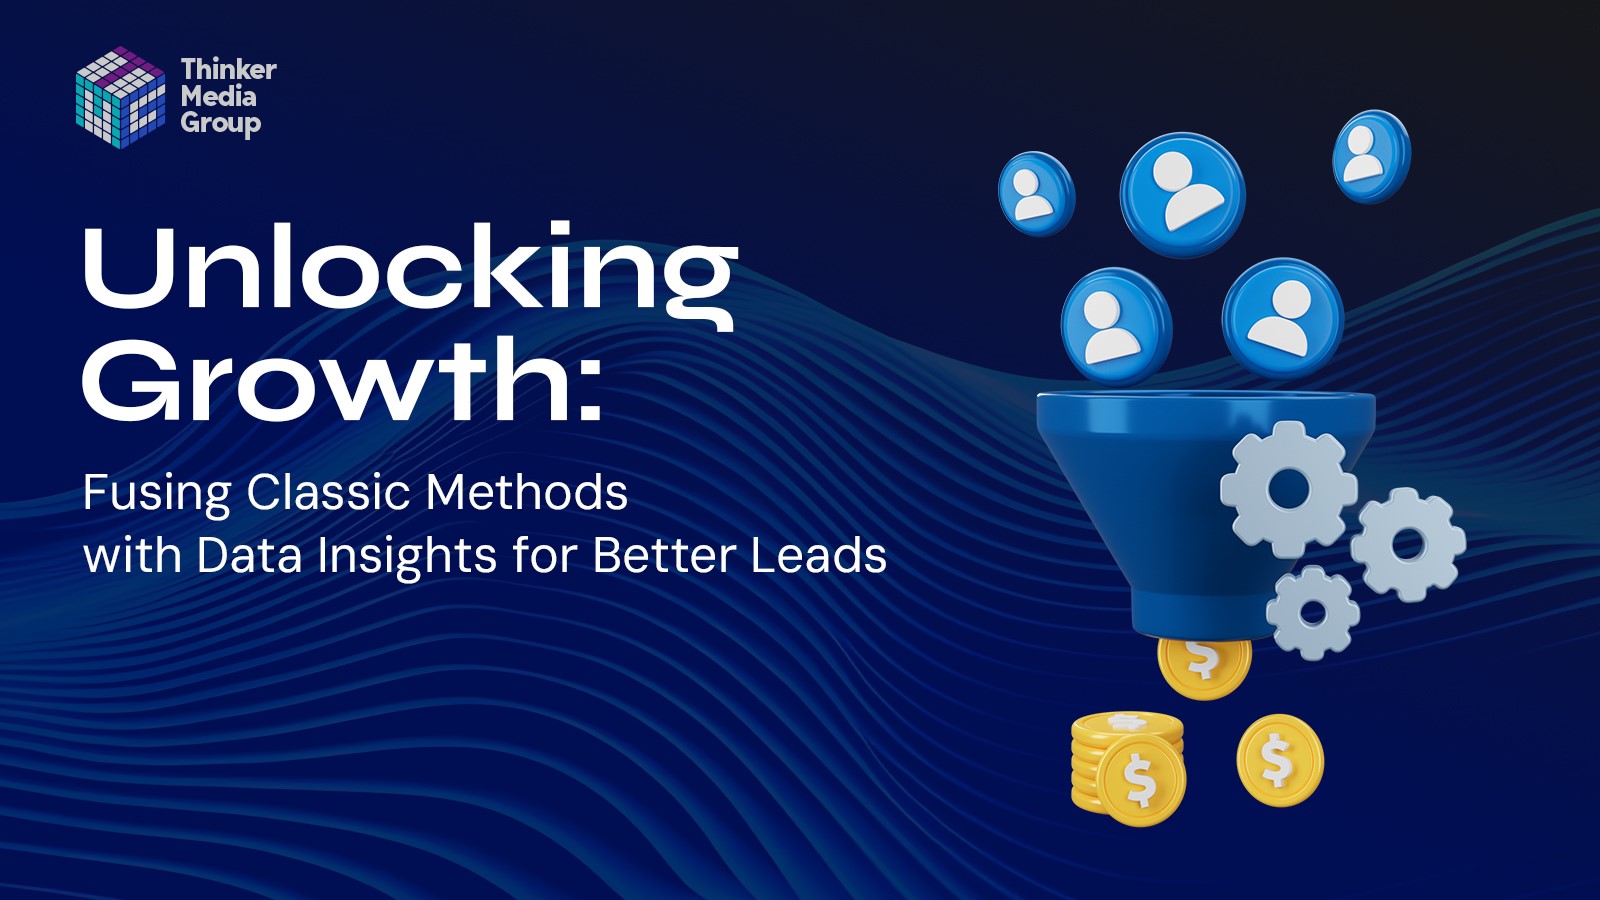 You are currently viewing Unlocking Growth: Fusing Classic Methods with Data Insights for Better Leads